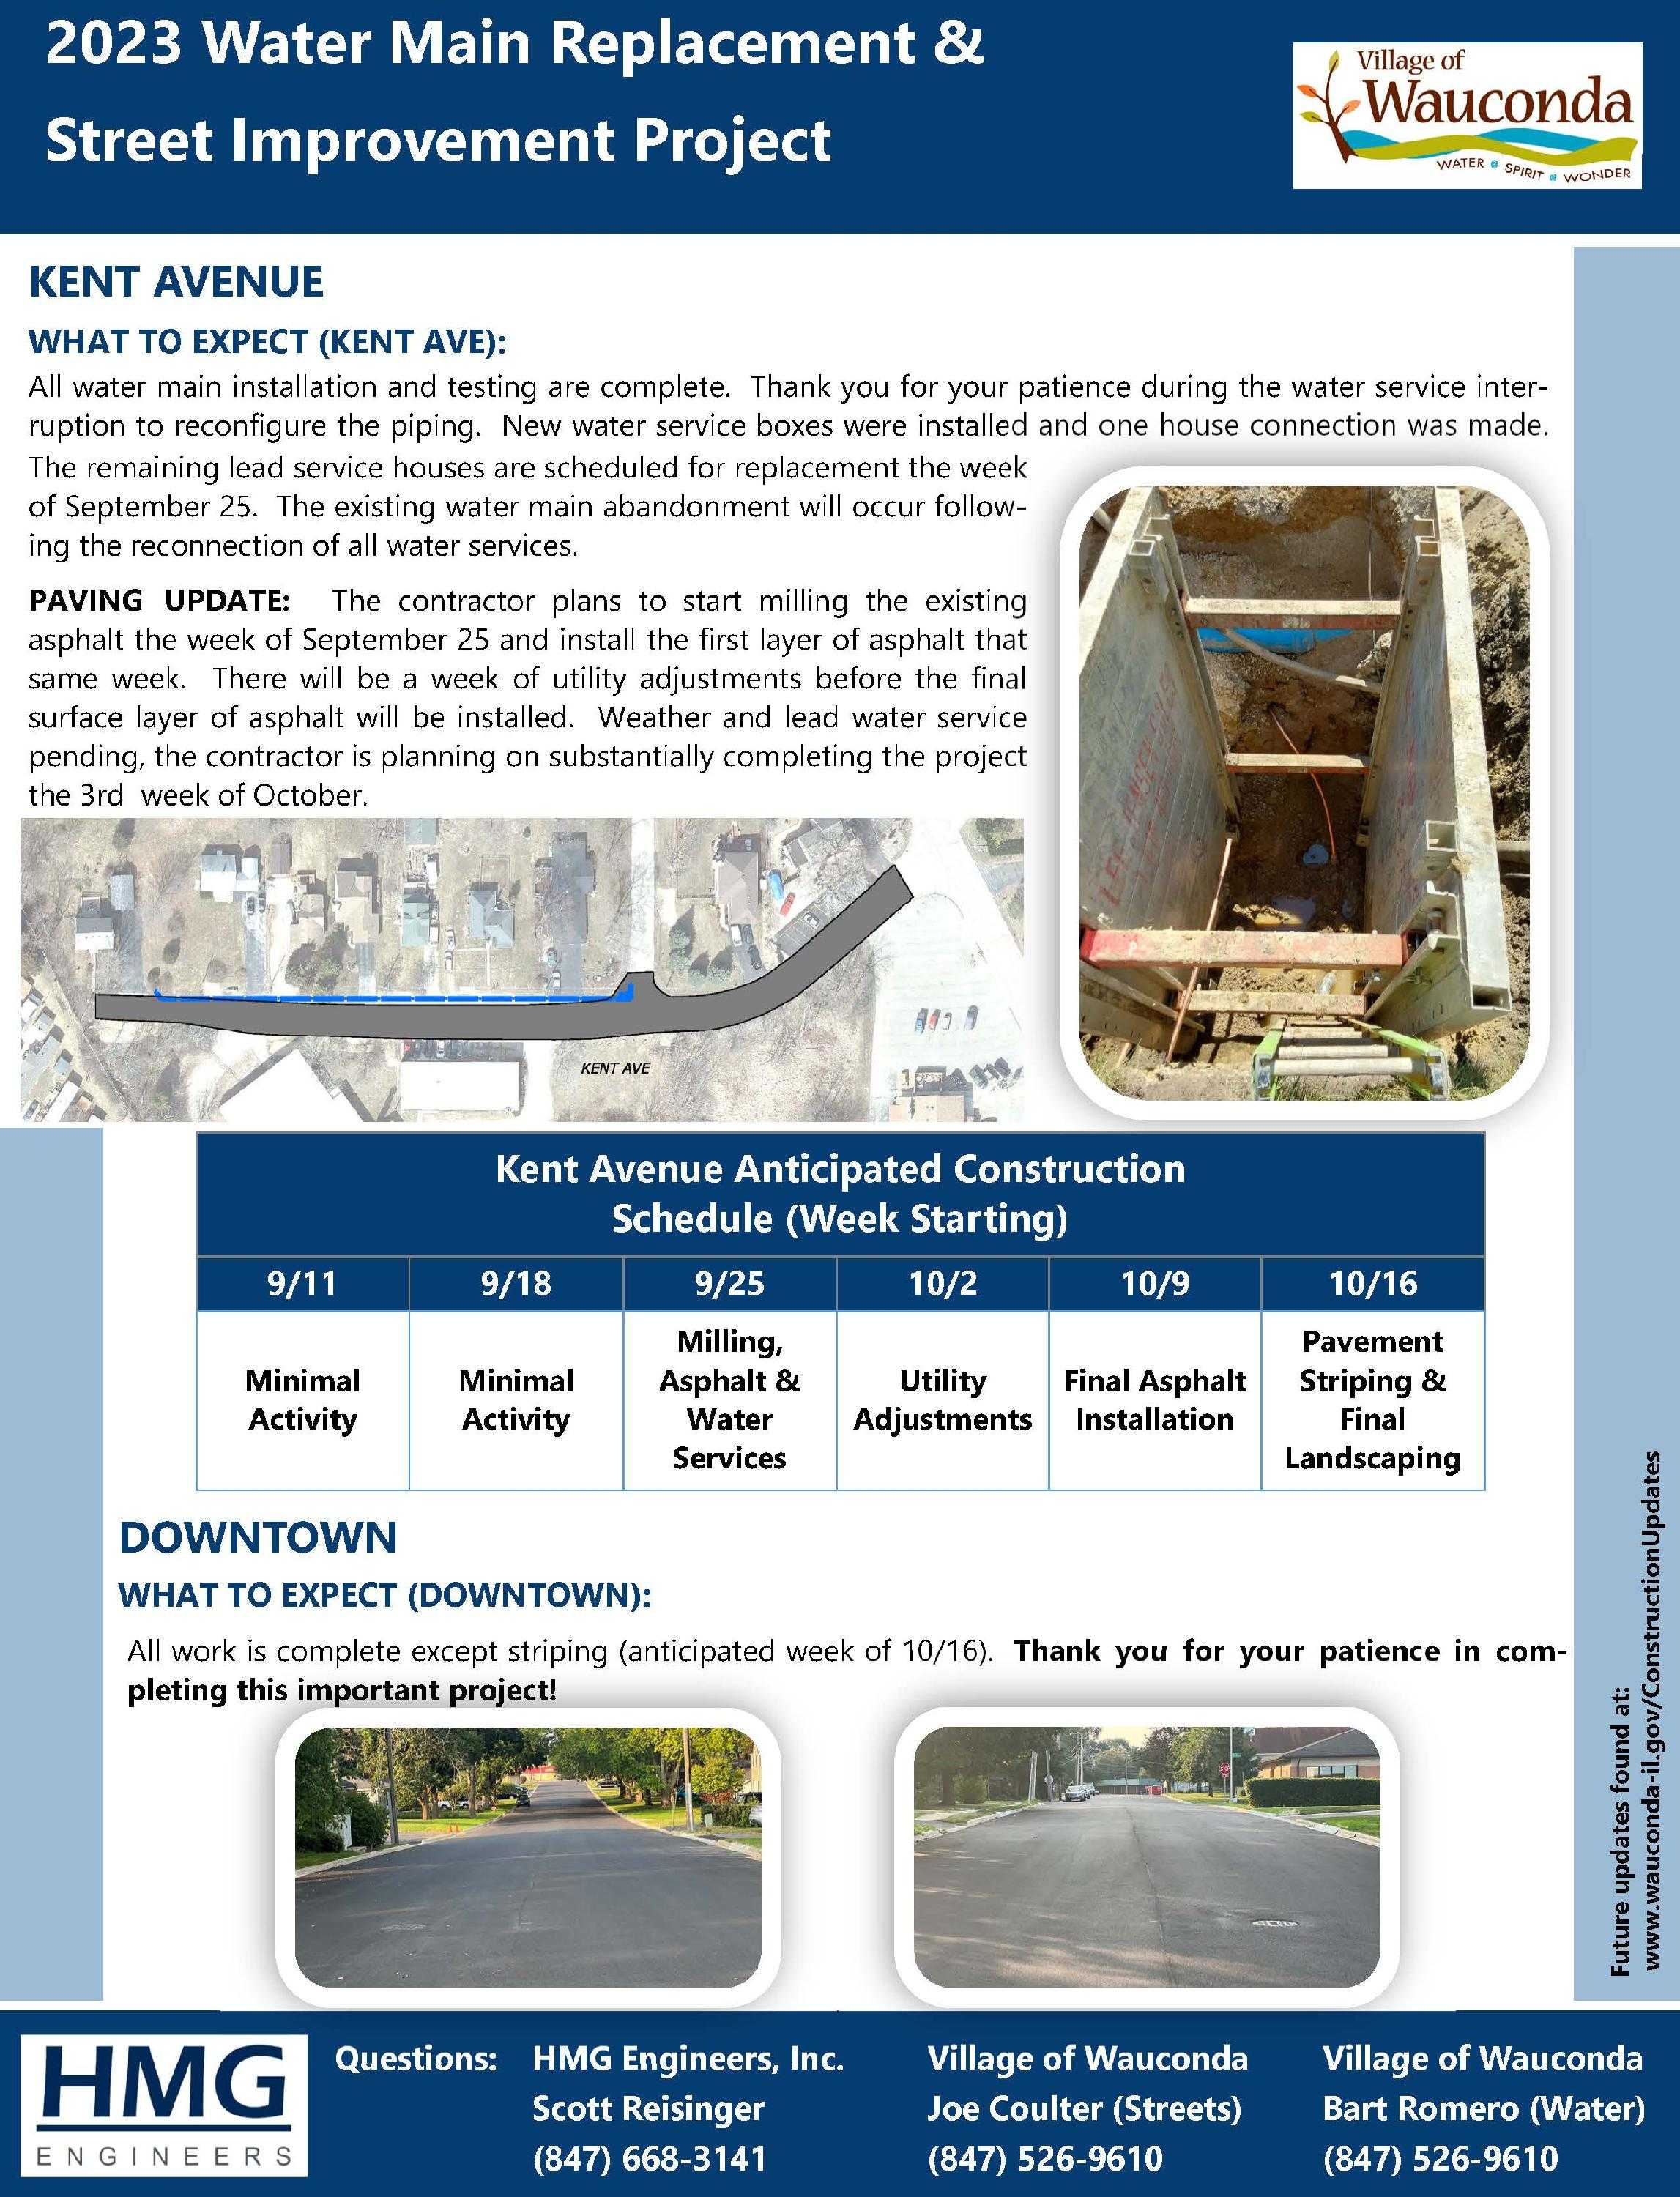 South 091523 Construction Flyer (002)_Page_2 - Copy